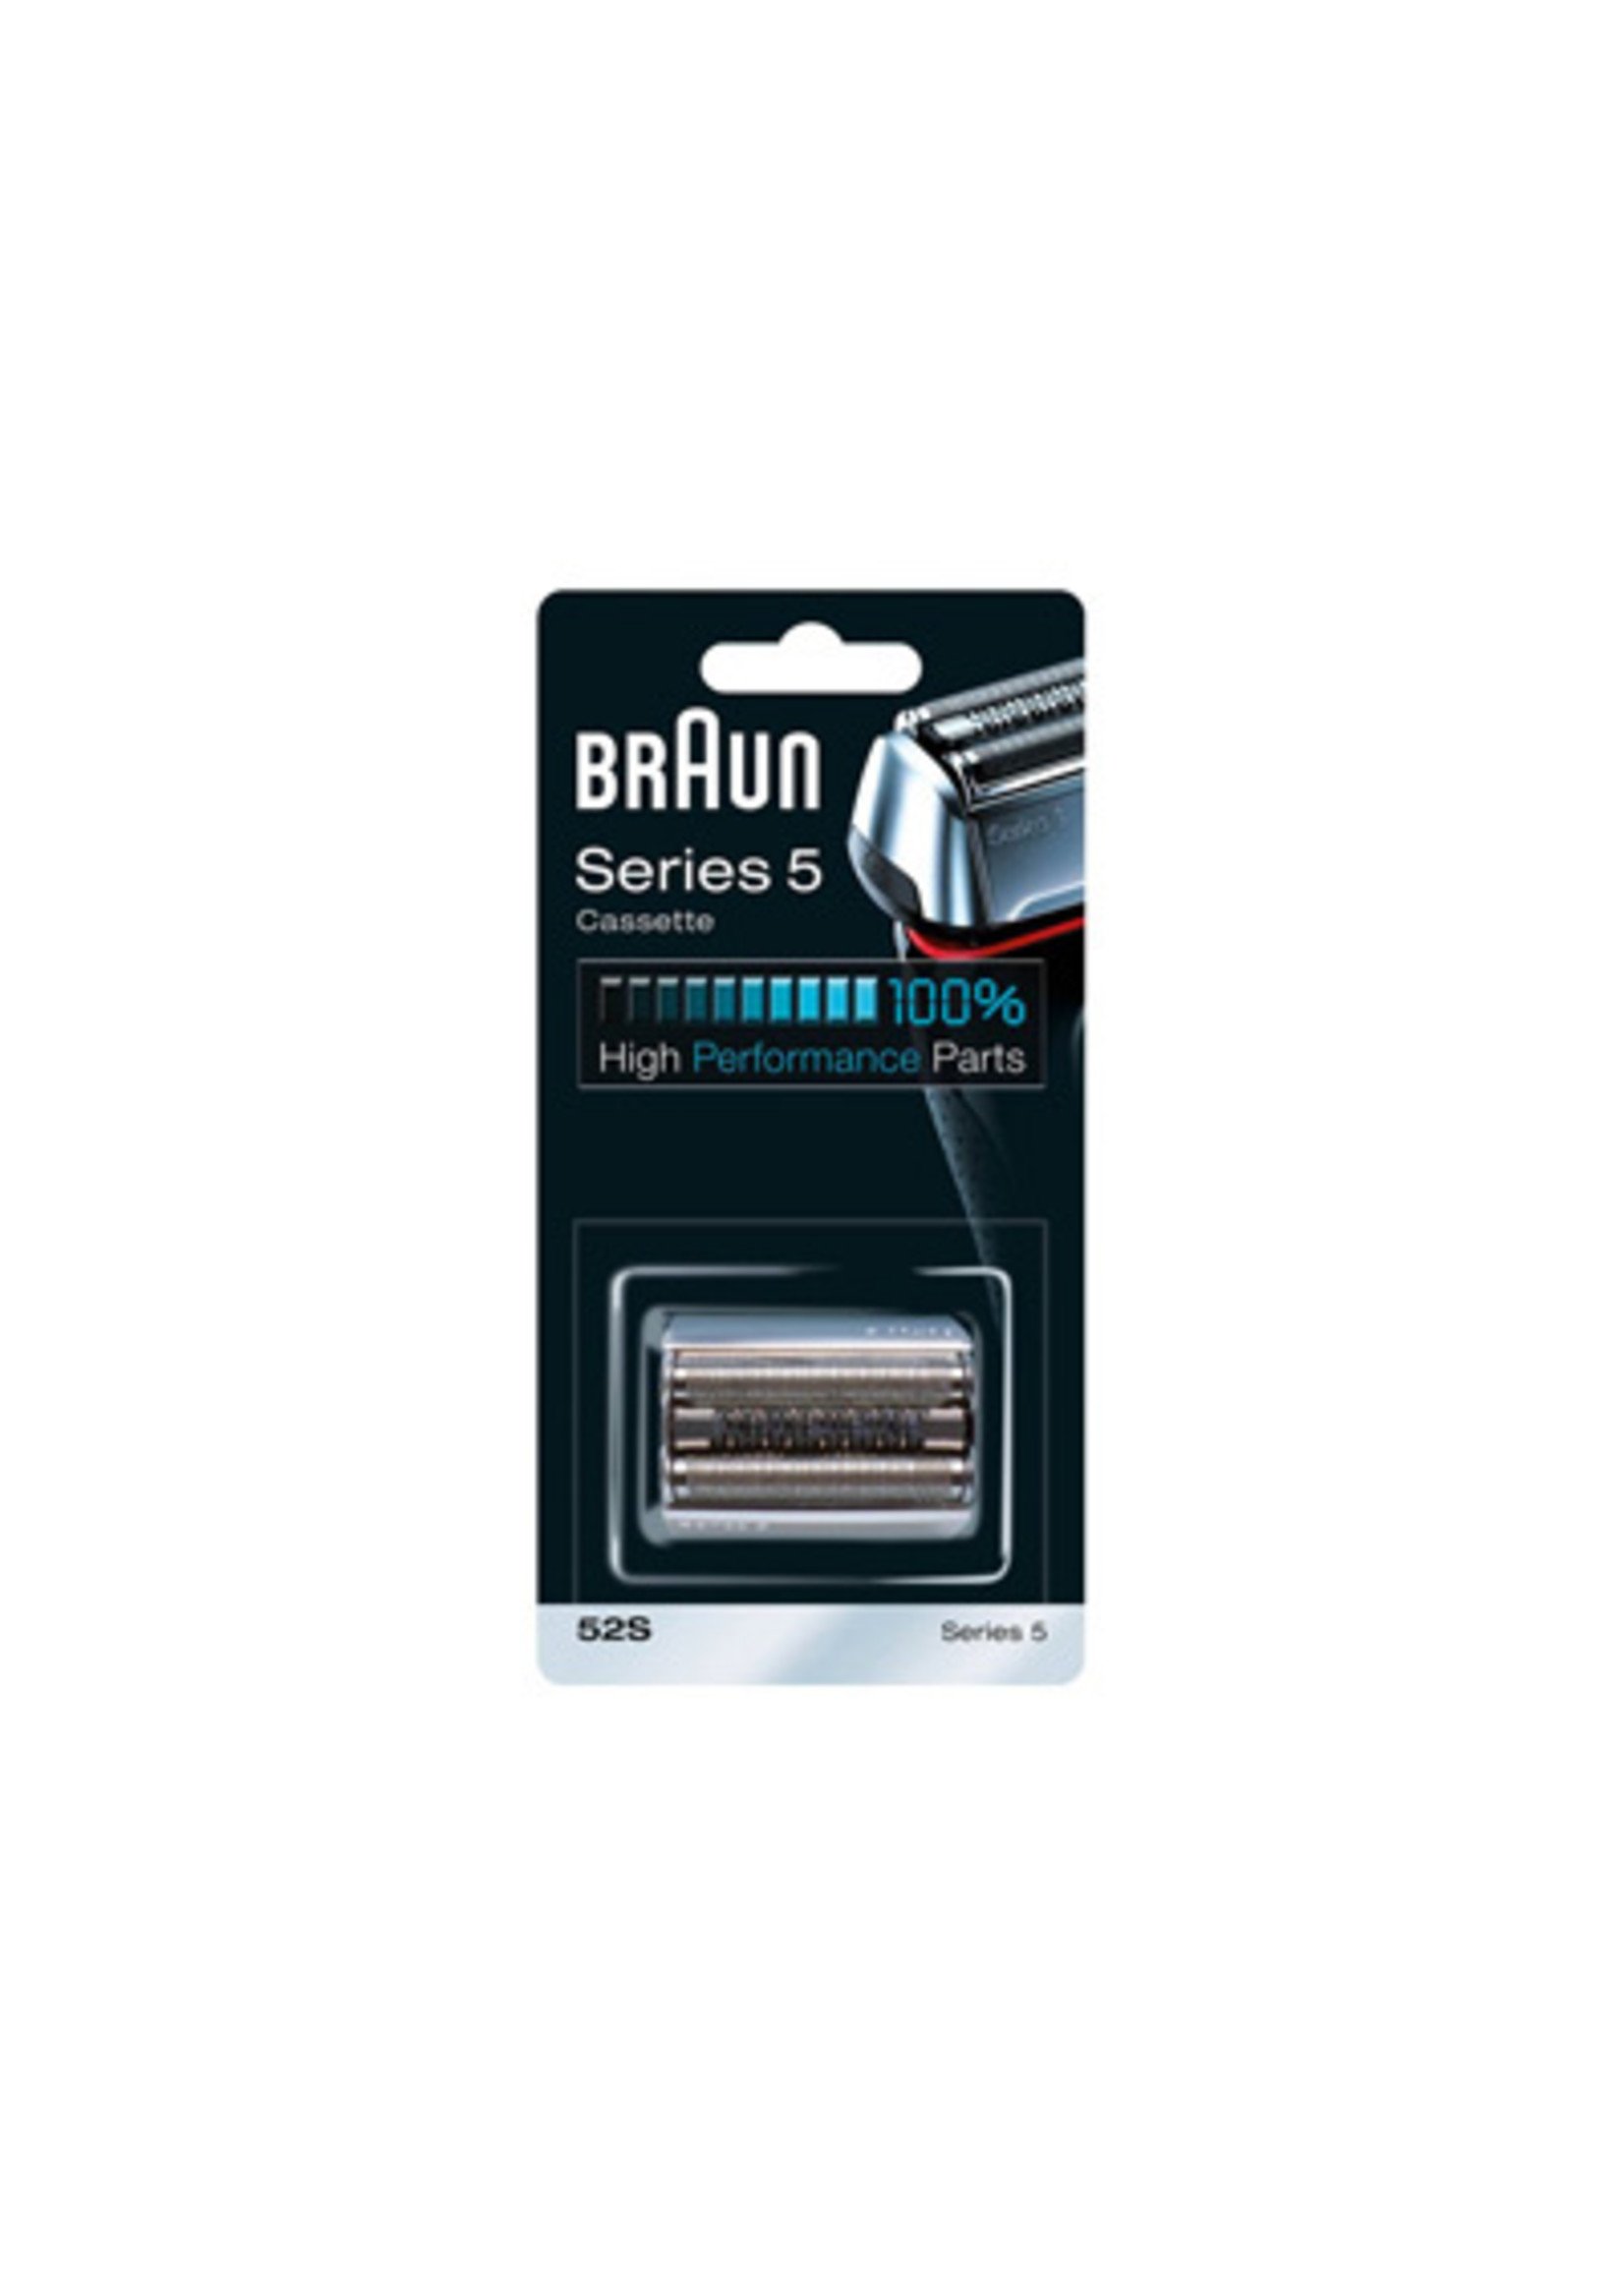 BRAUN 52S GRILLE/COUTEAU 52S ARGENT